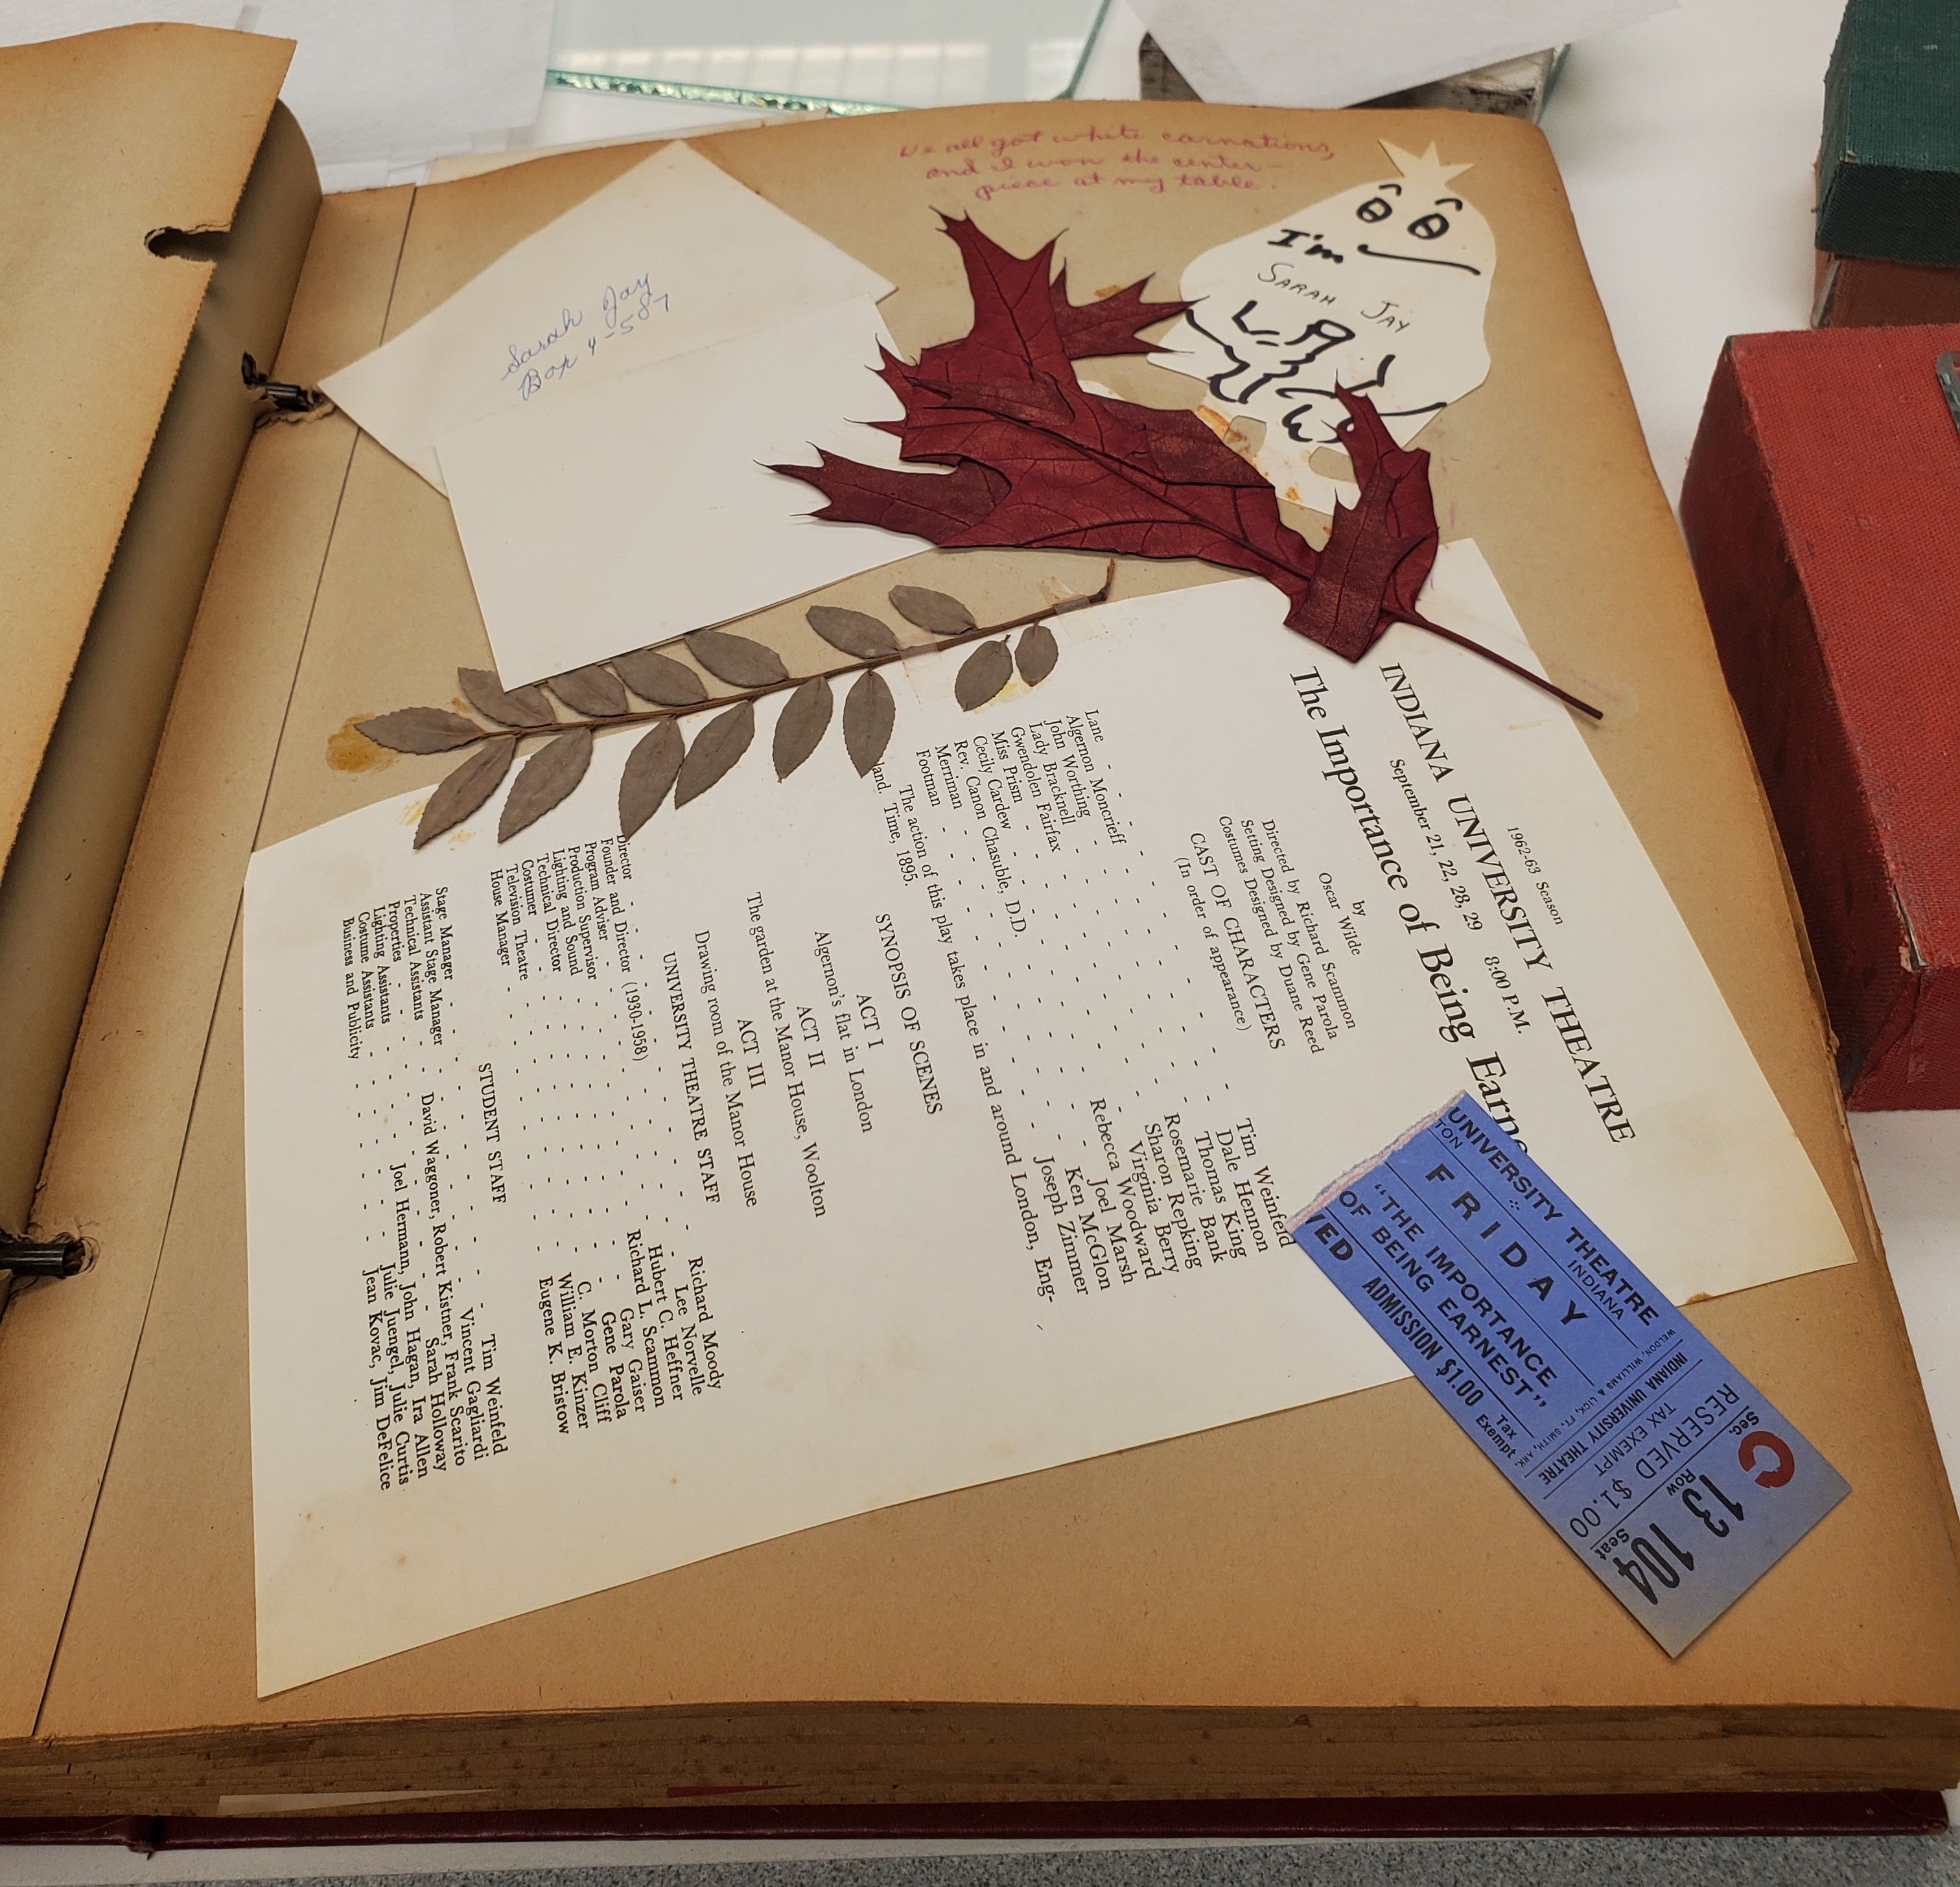 Scrapbook open to page containing a ticket stub, a theater program from the Importance of Being Earnest from the 1962-63 Indiana University Theatre Season, a crimson-colored leaf and a branch with many small leaves